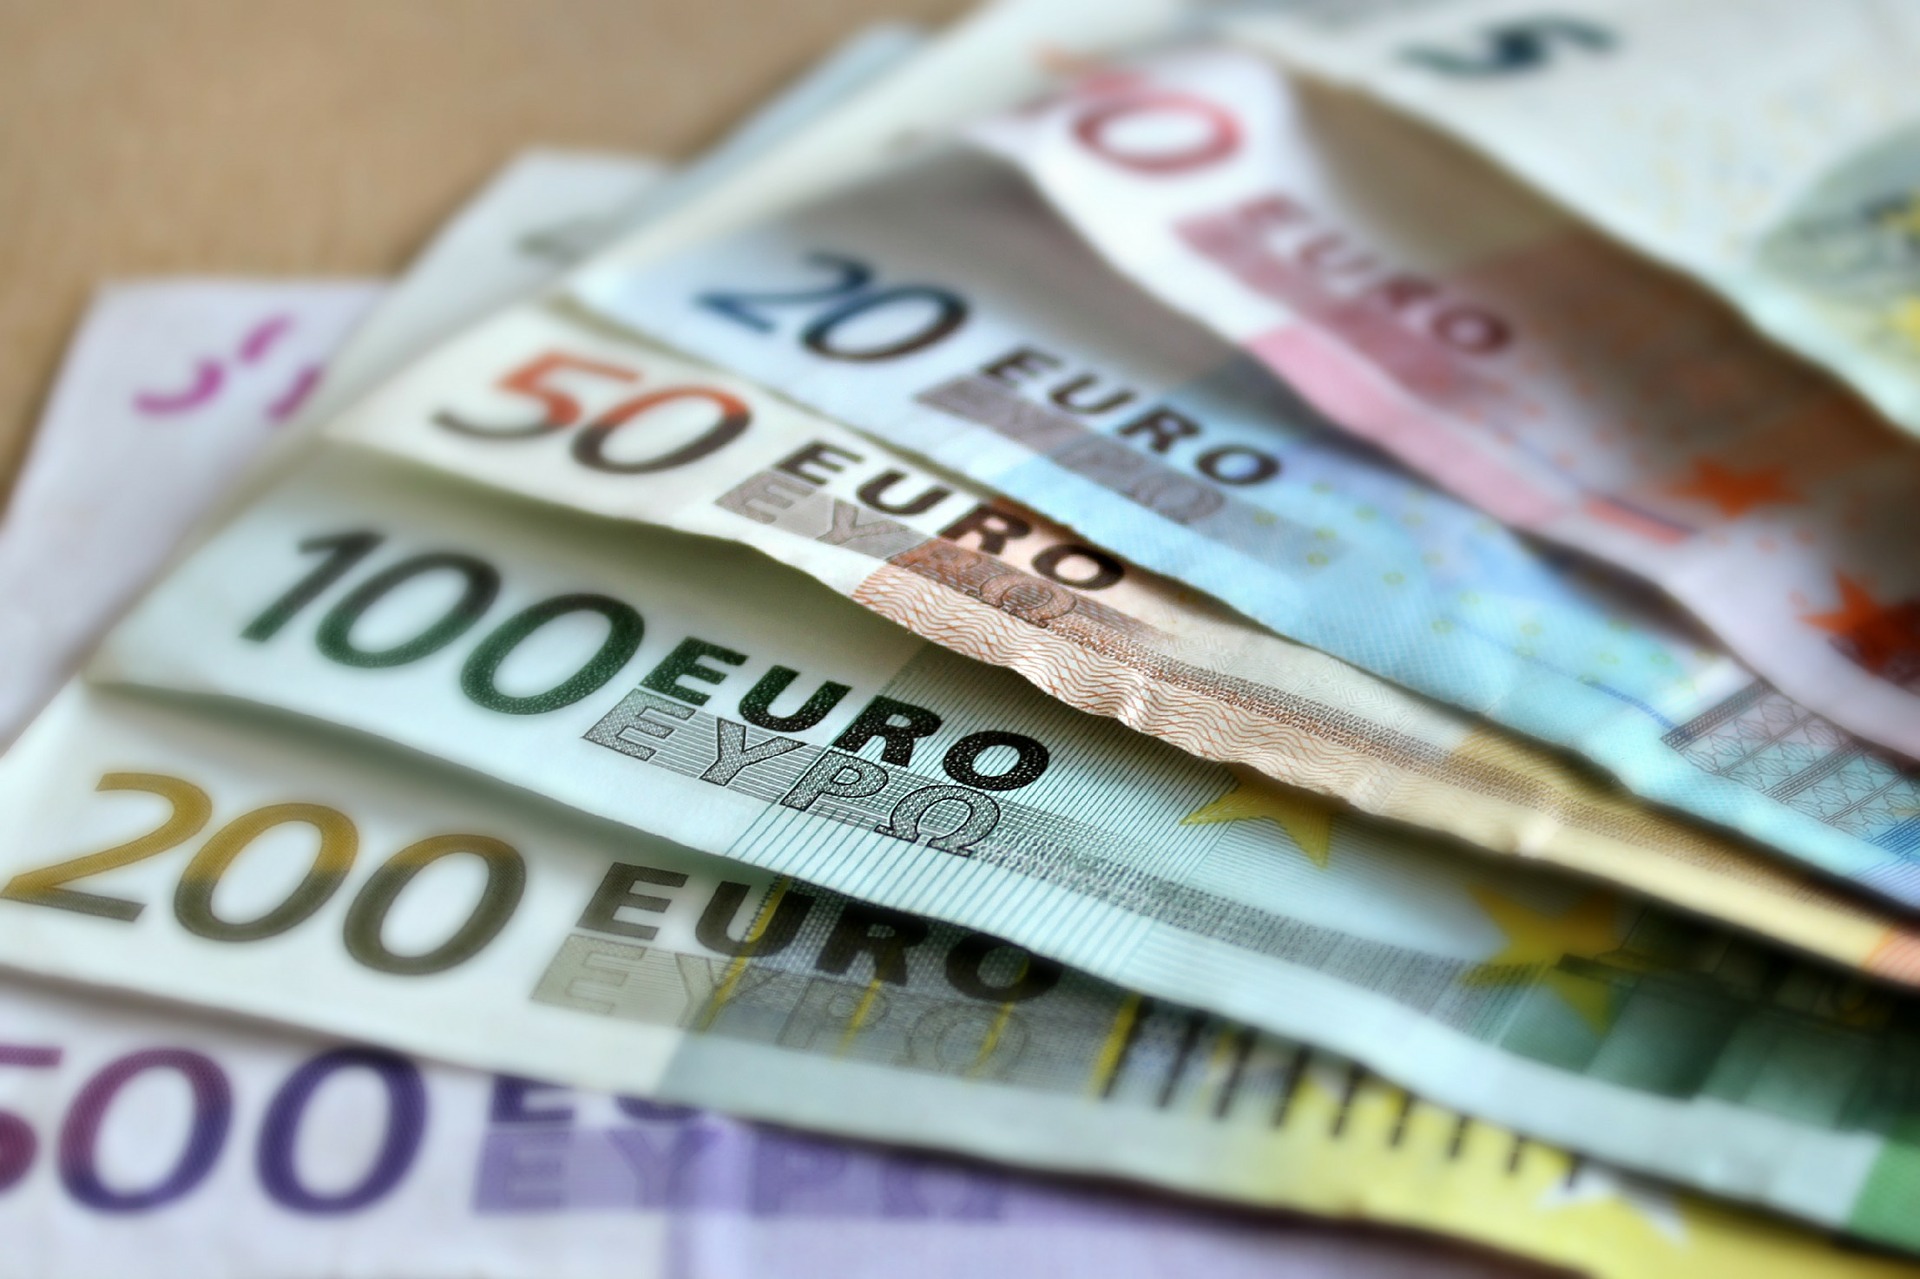 More Than Two-Thirds of Hungarians in Favor of Introducing the Euro